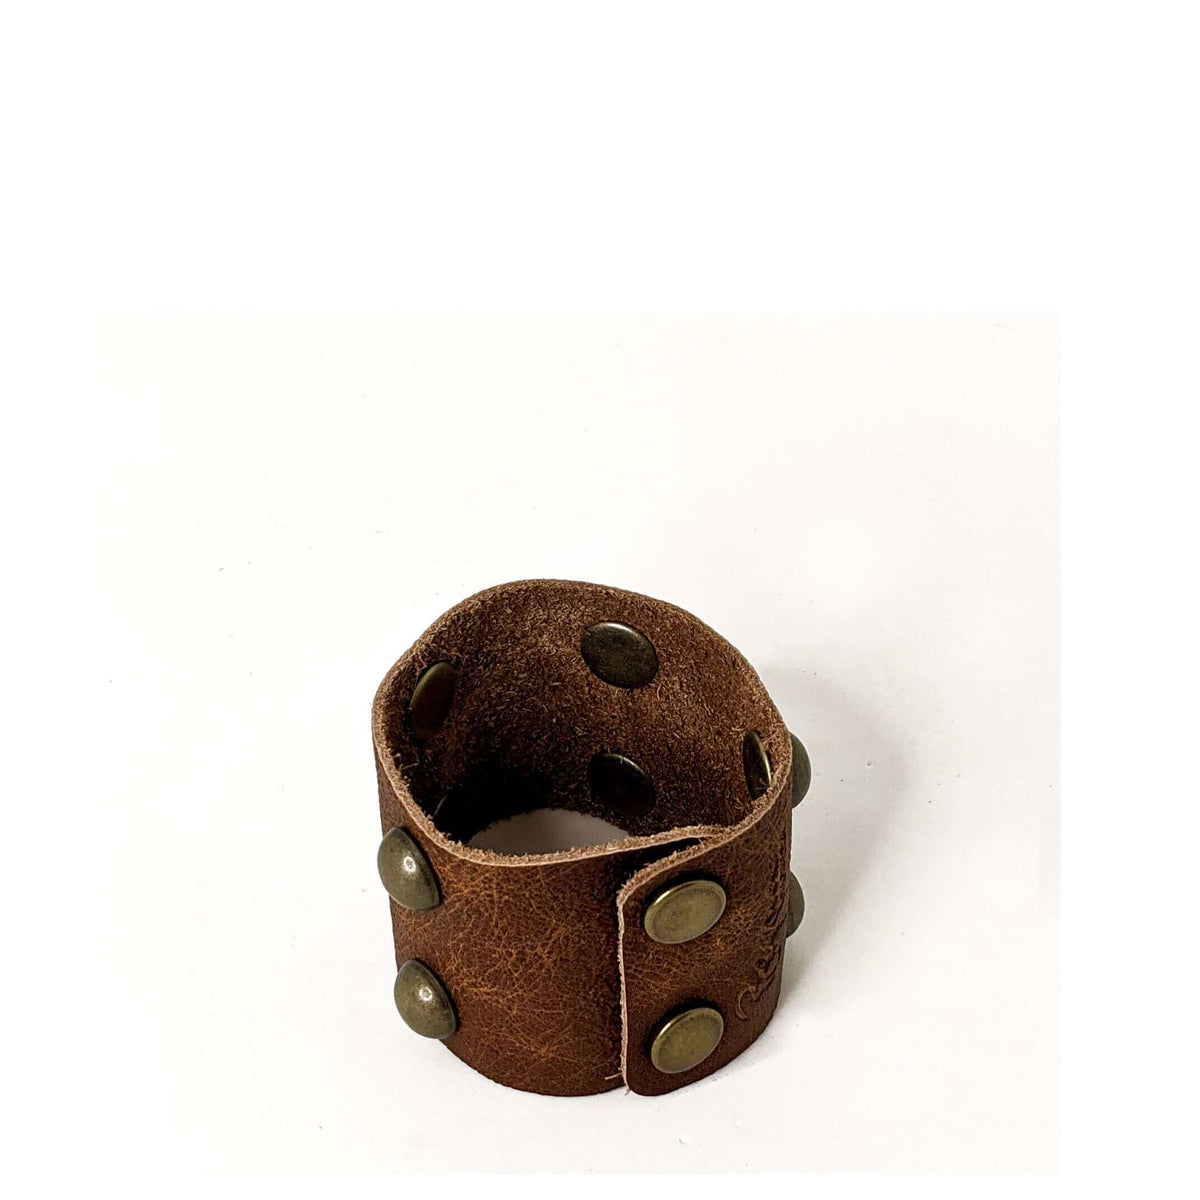 Lexy Studded Bracelet | Brynn Capella, Leather Goods Made in the USA $48 Leather Bracelet accessories, Brown, Distressed Leather, Semi-Aniline Leather, Vintage leather